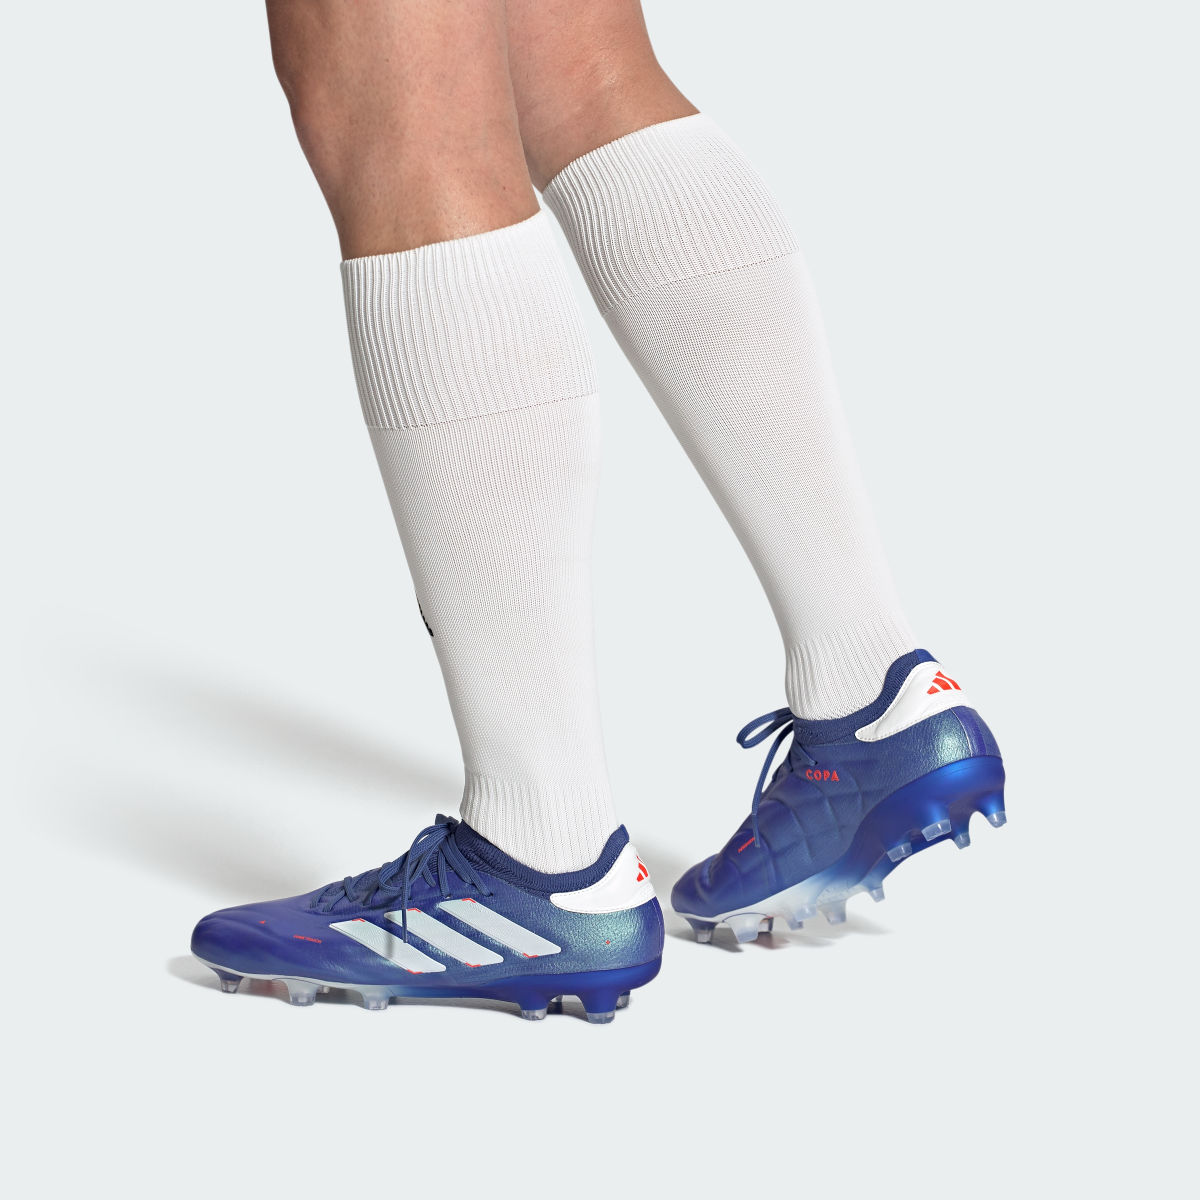 Adidas Copa Pure II+ Firm Ground Boots. 6